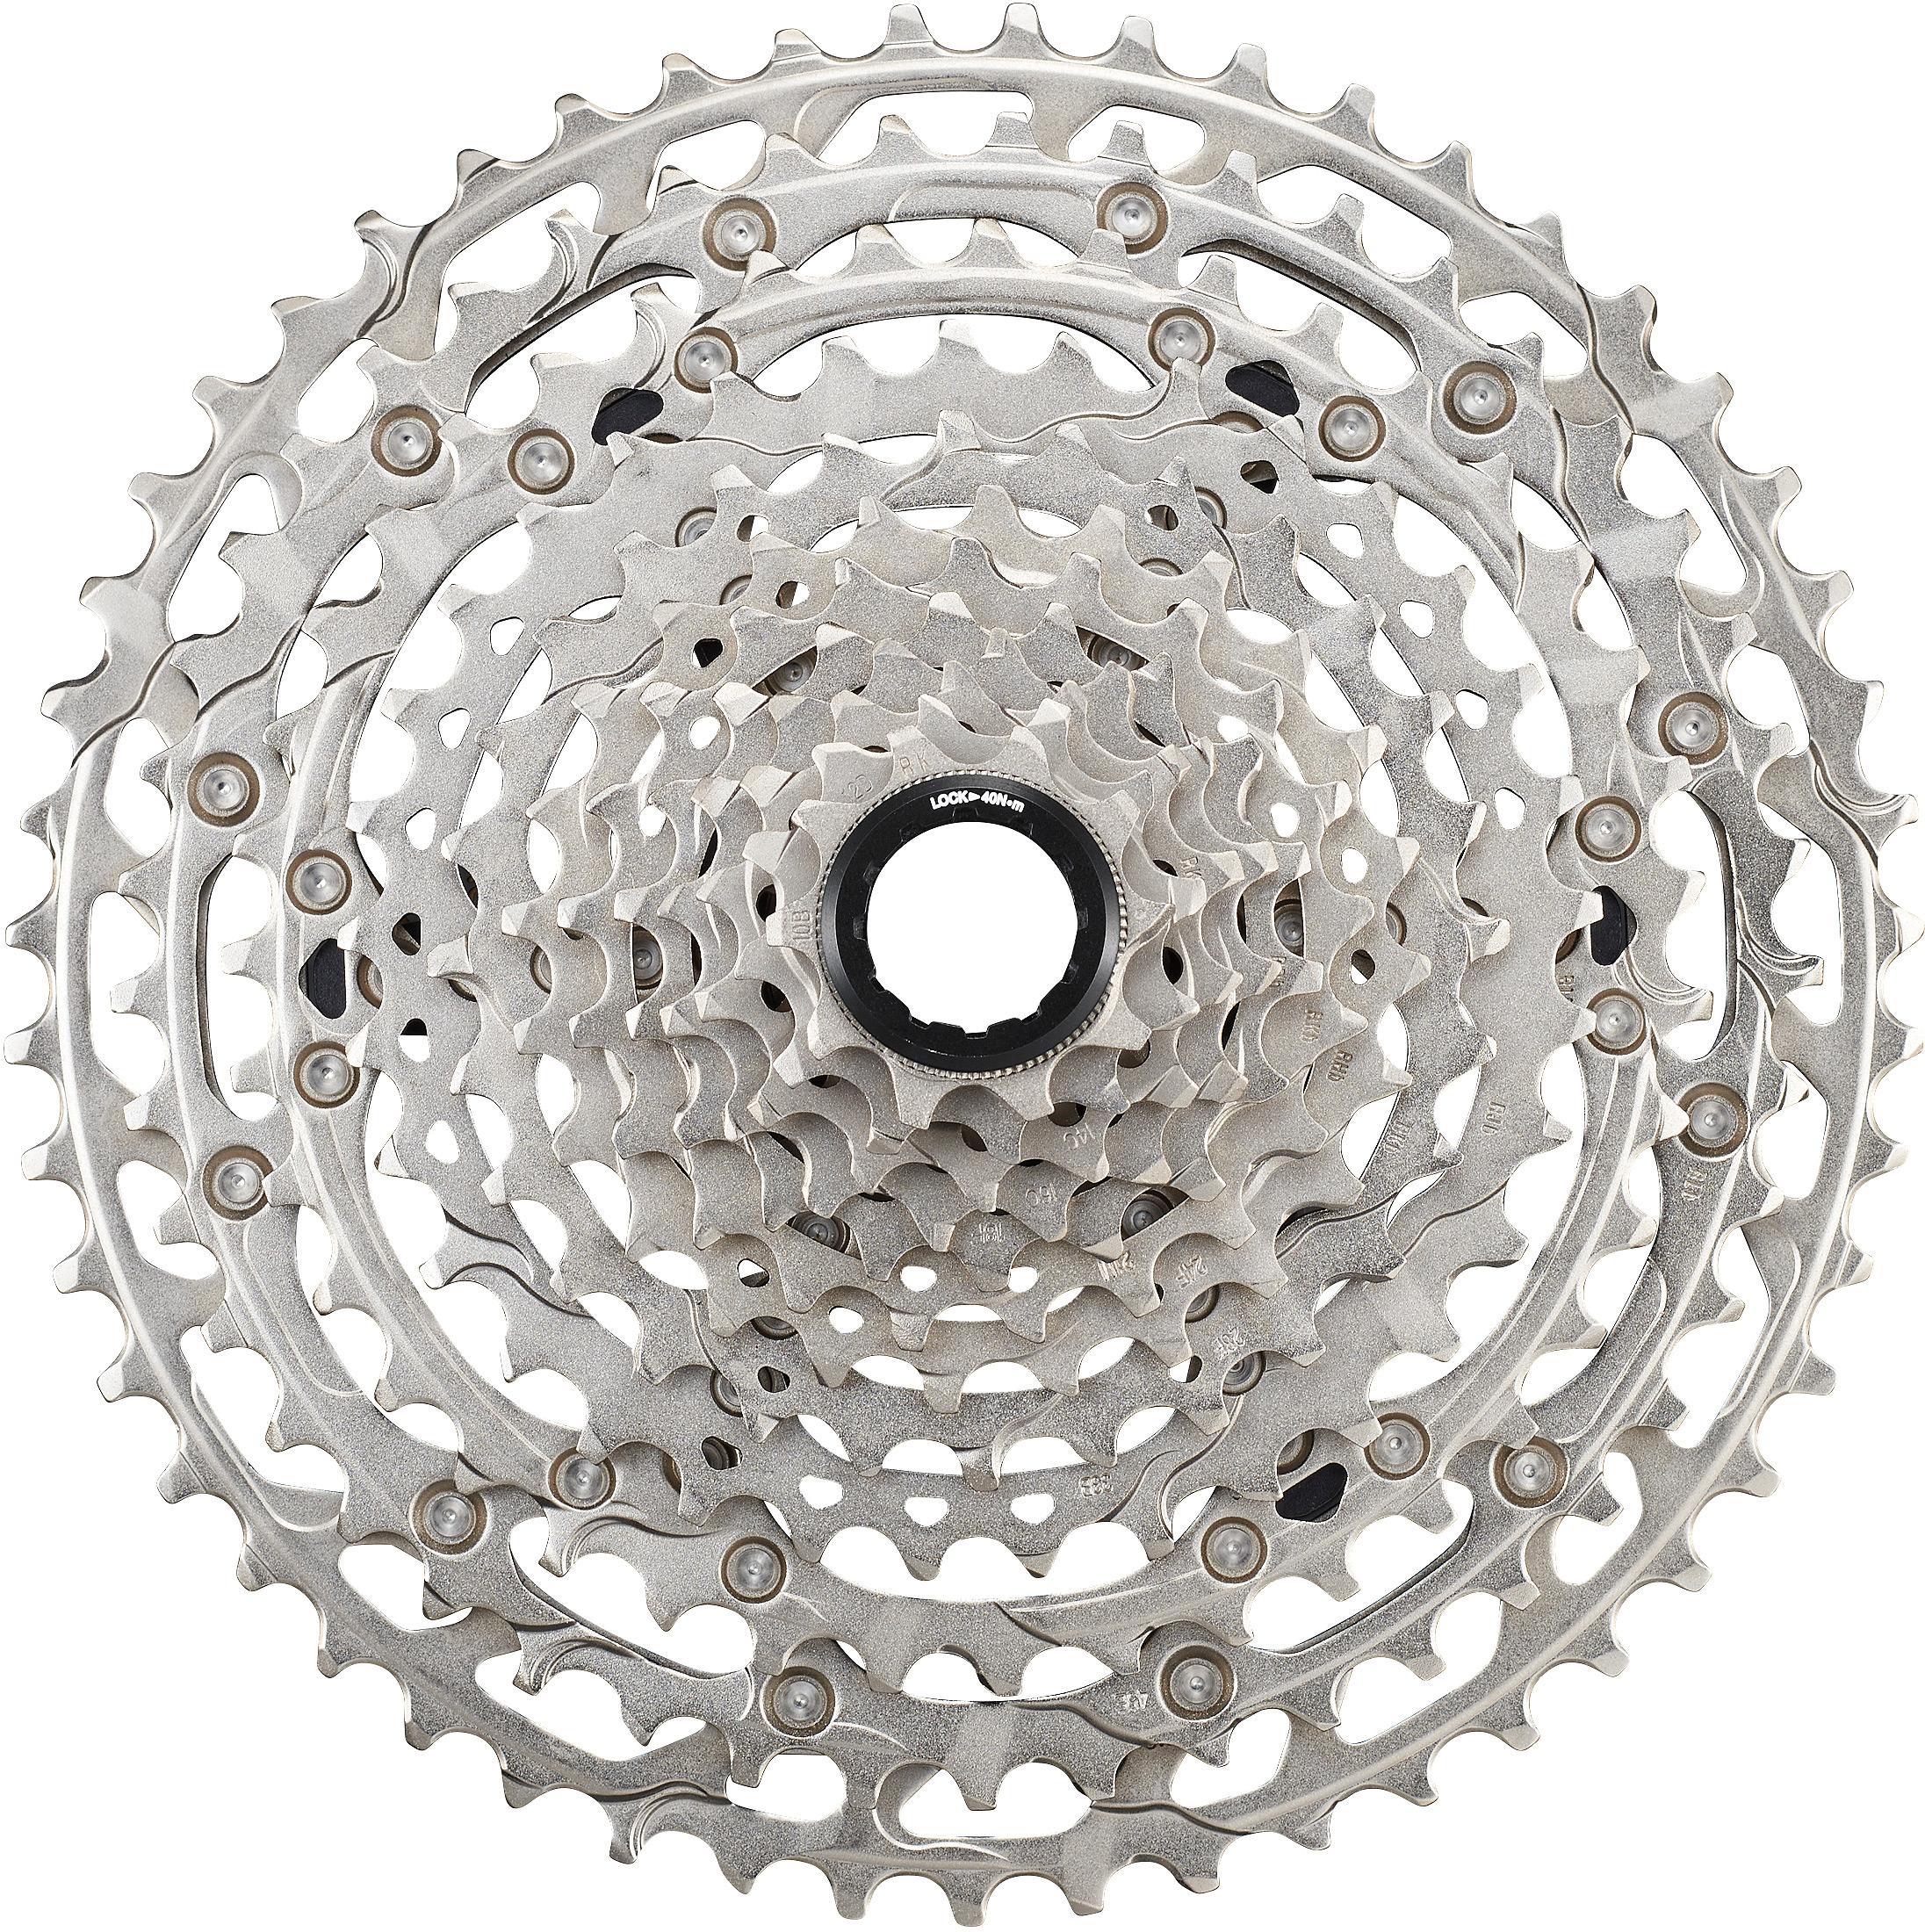 Shimano Deore M6100 12 Speed Mtb Cassette  Silver